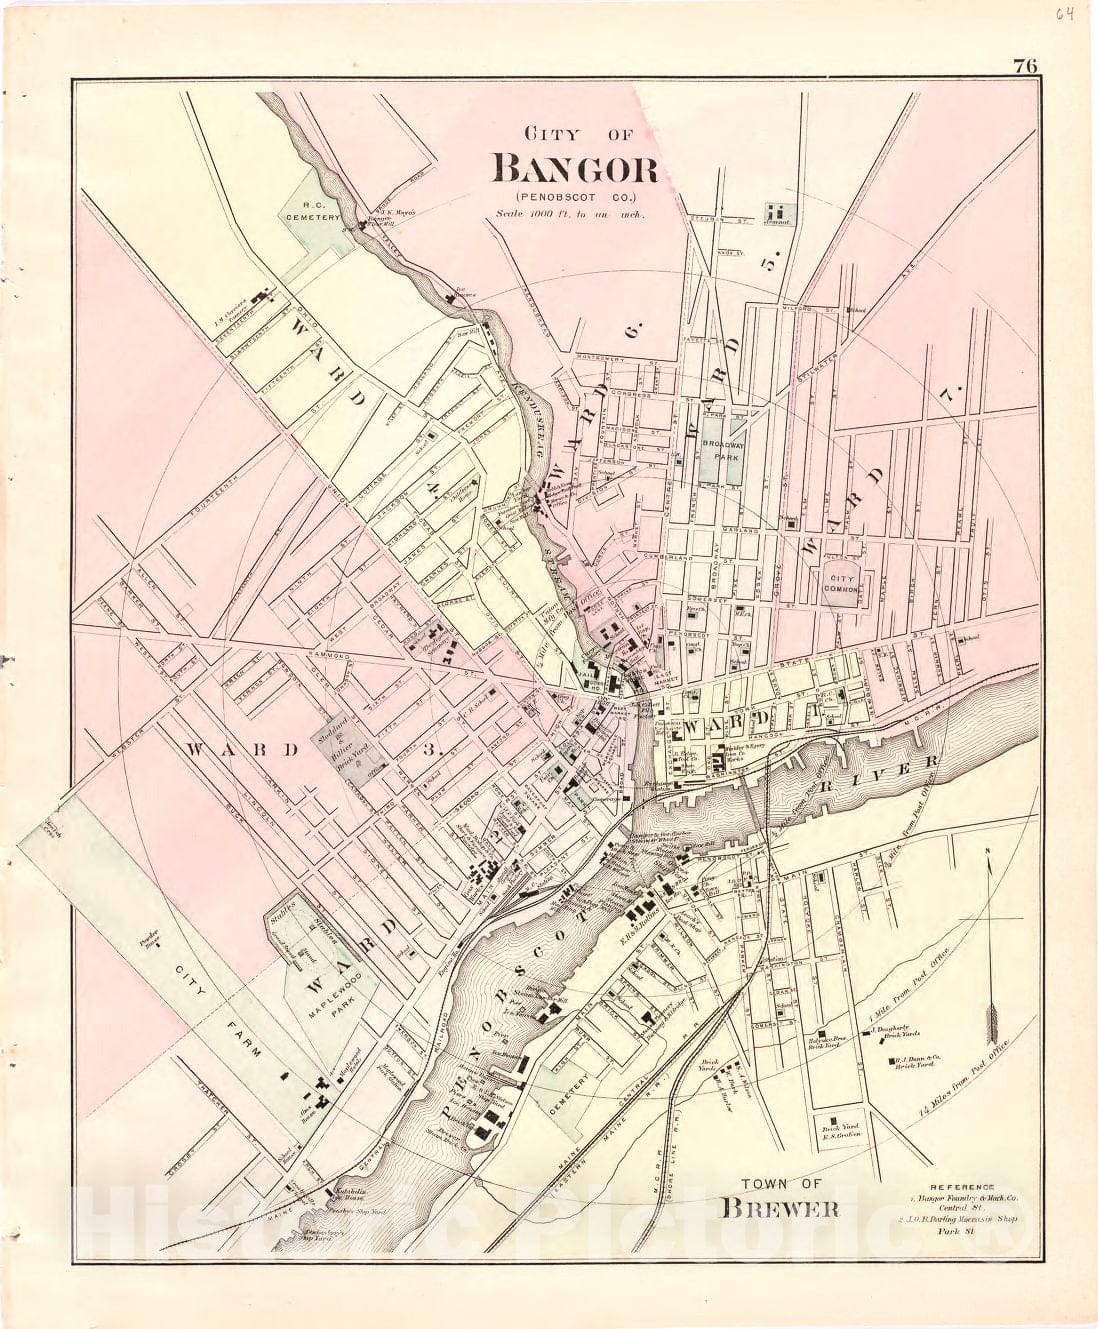 Historic 1887 Map - Colby's Atlas of The State of Maine - City of Bangor